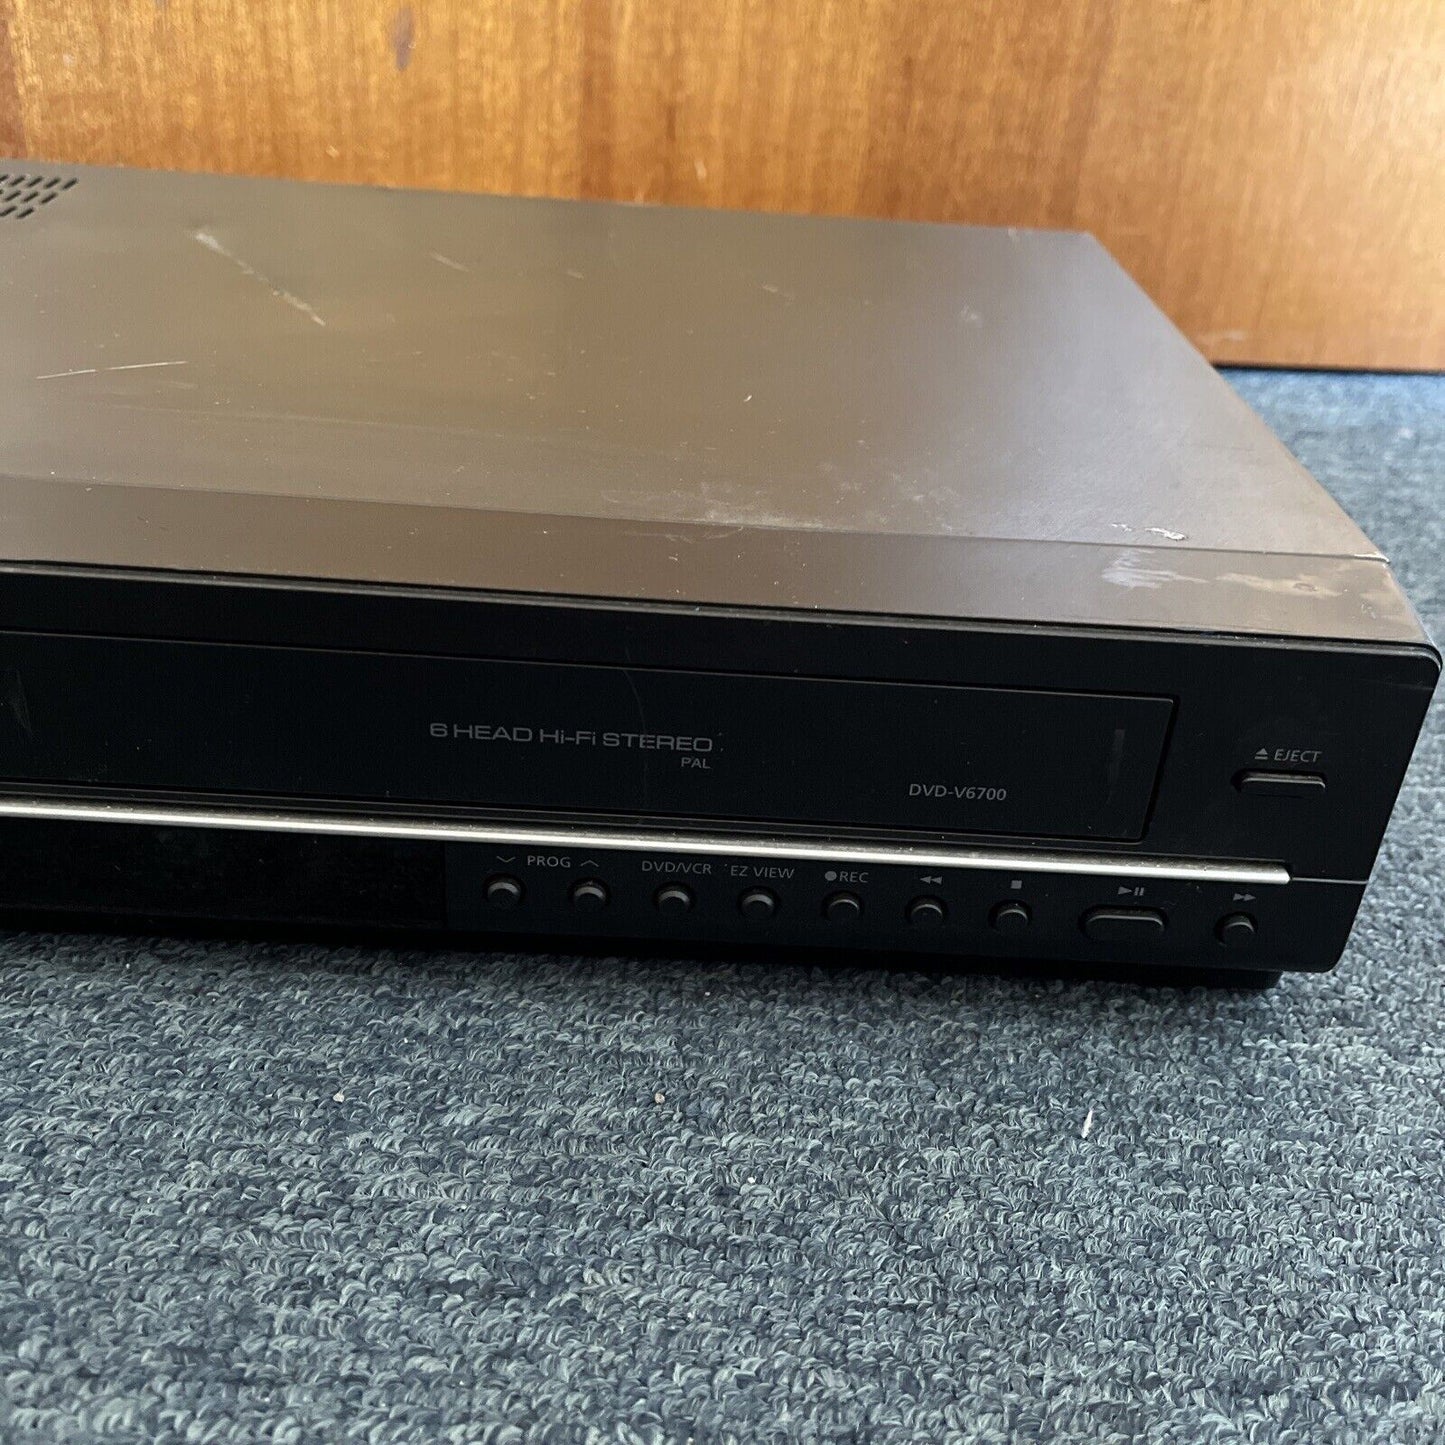 Samsung DVD VCR Combo DVD-V6700 Dvd Player / VHS Recorder *For Parts Or Repair